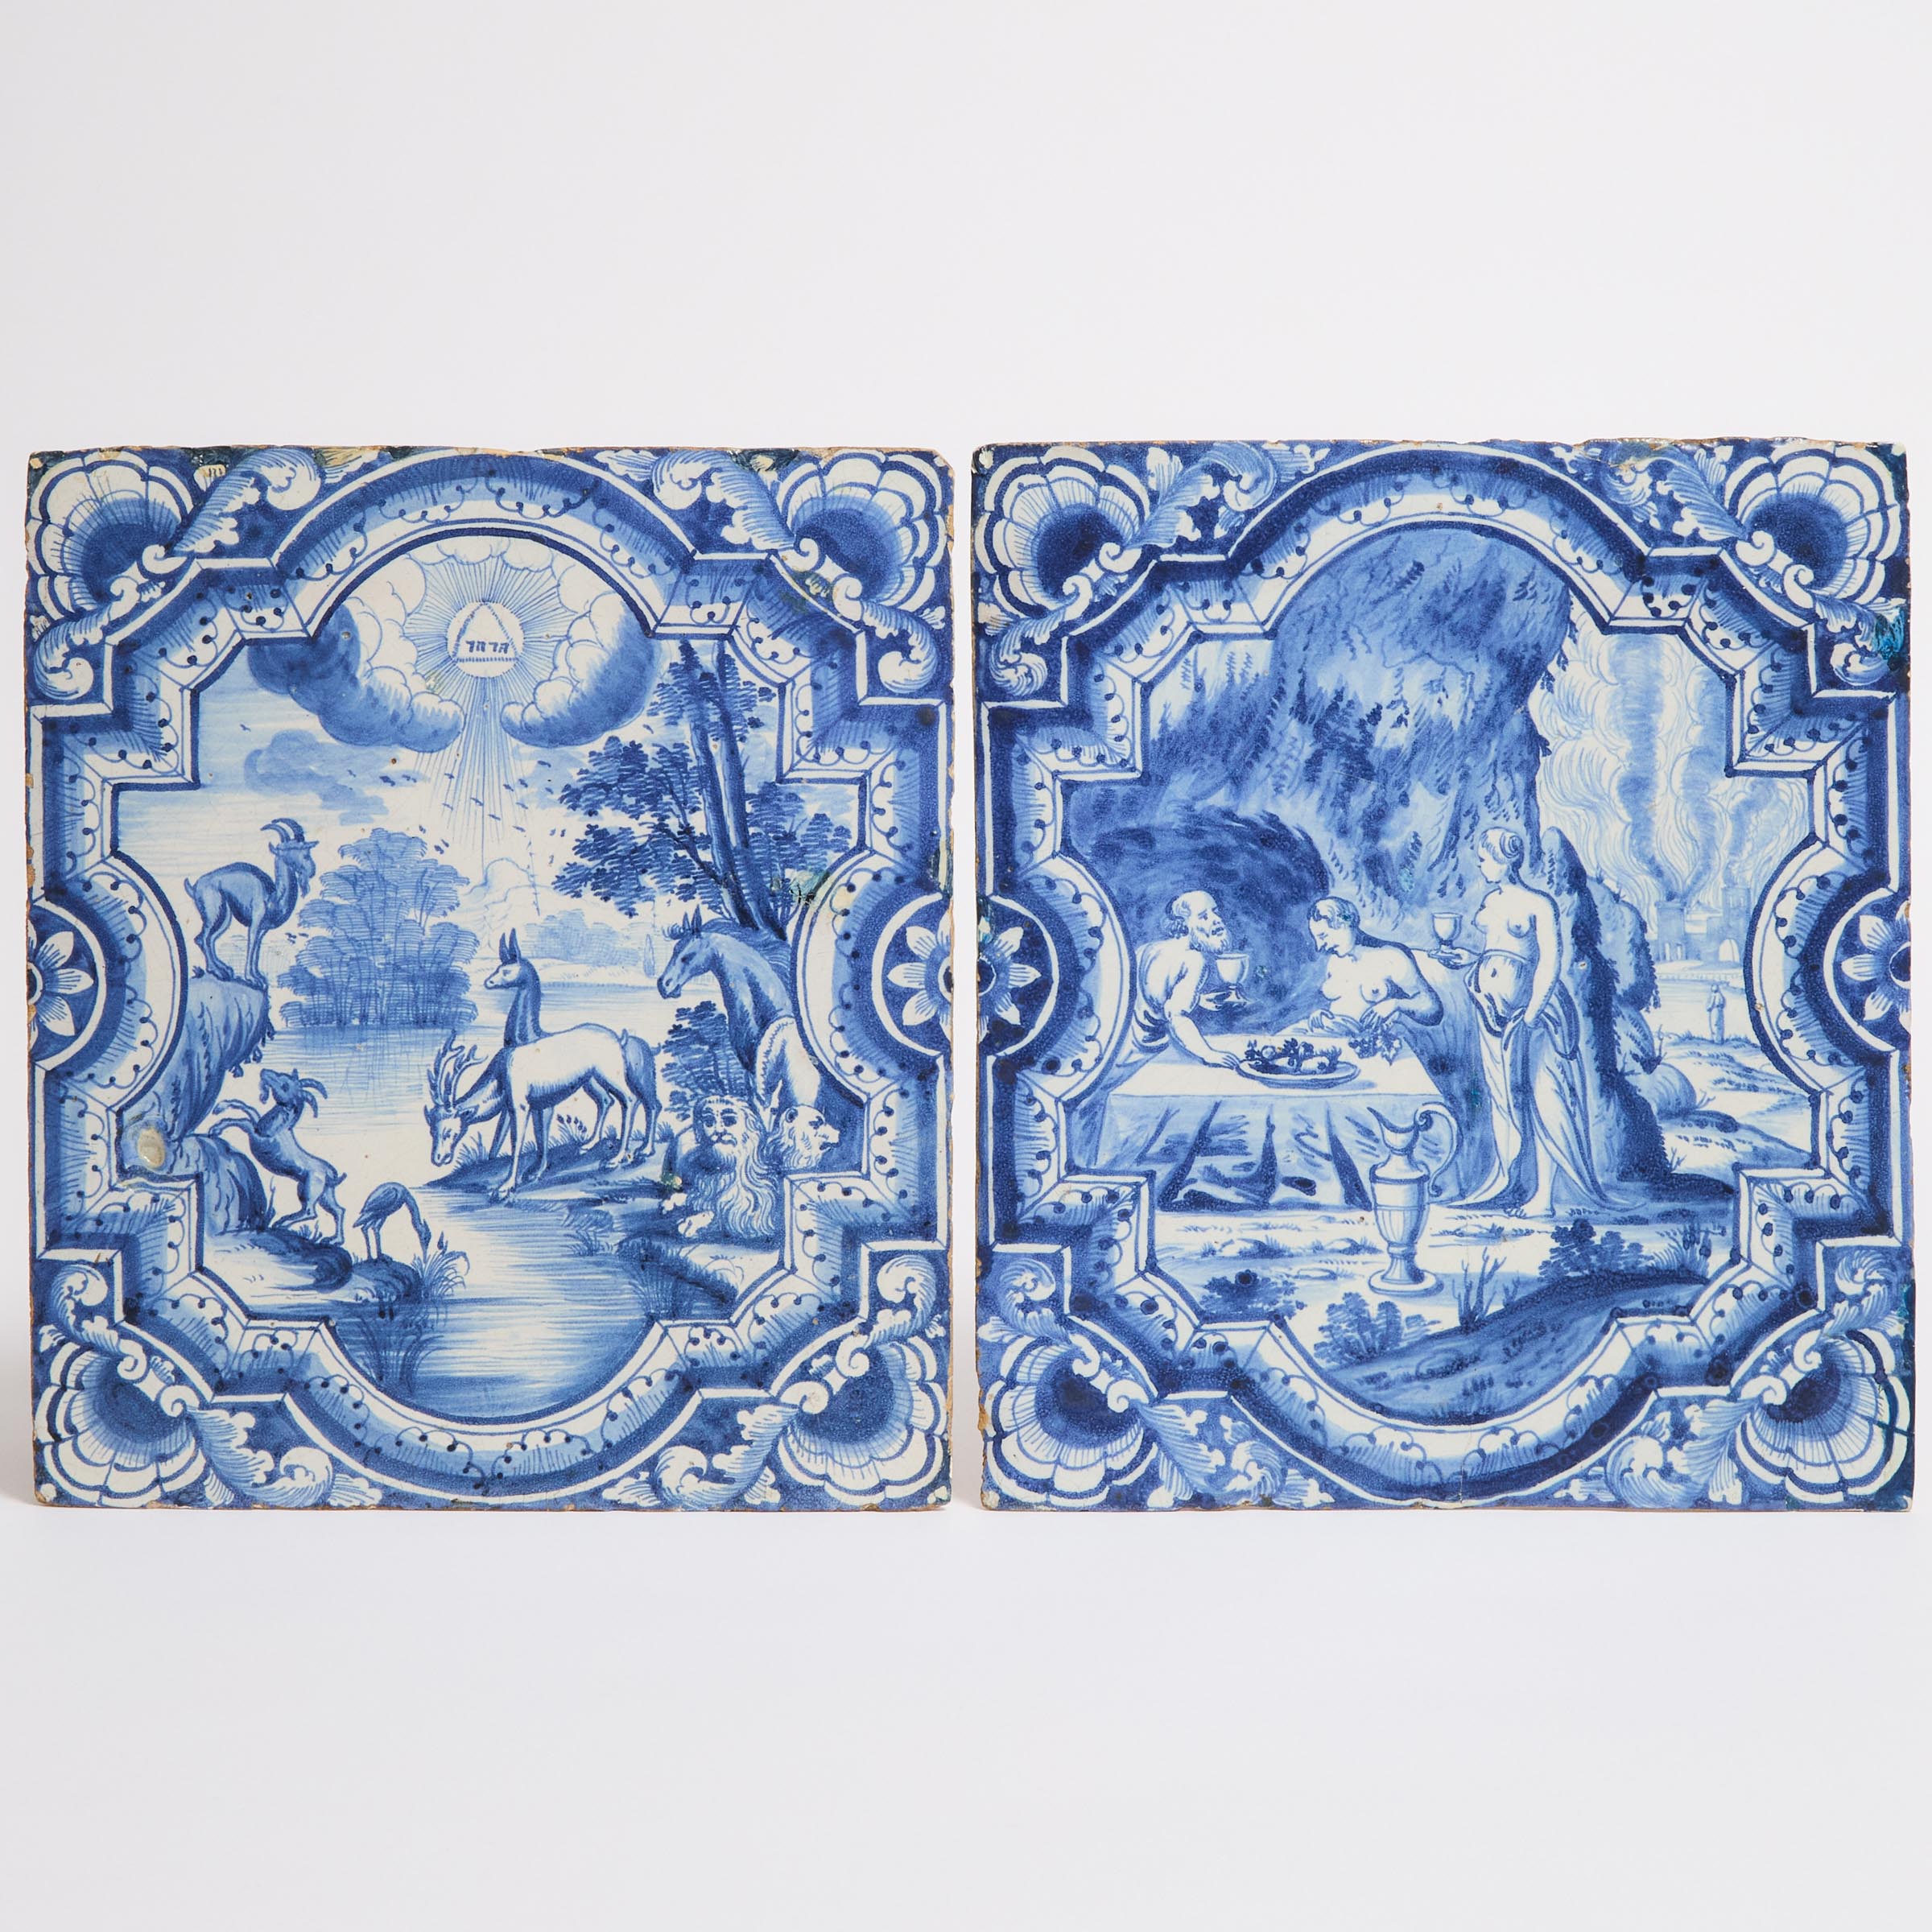 Two Delft Blue and White Rectangular